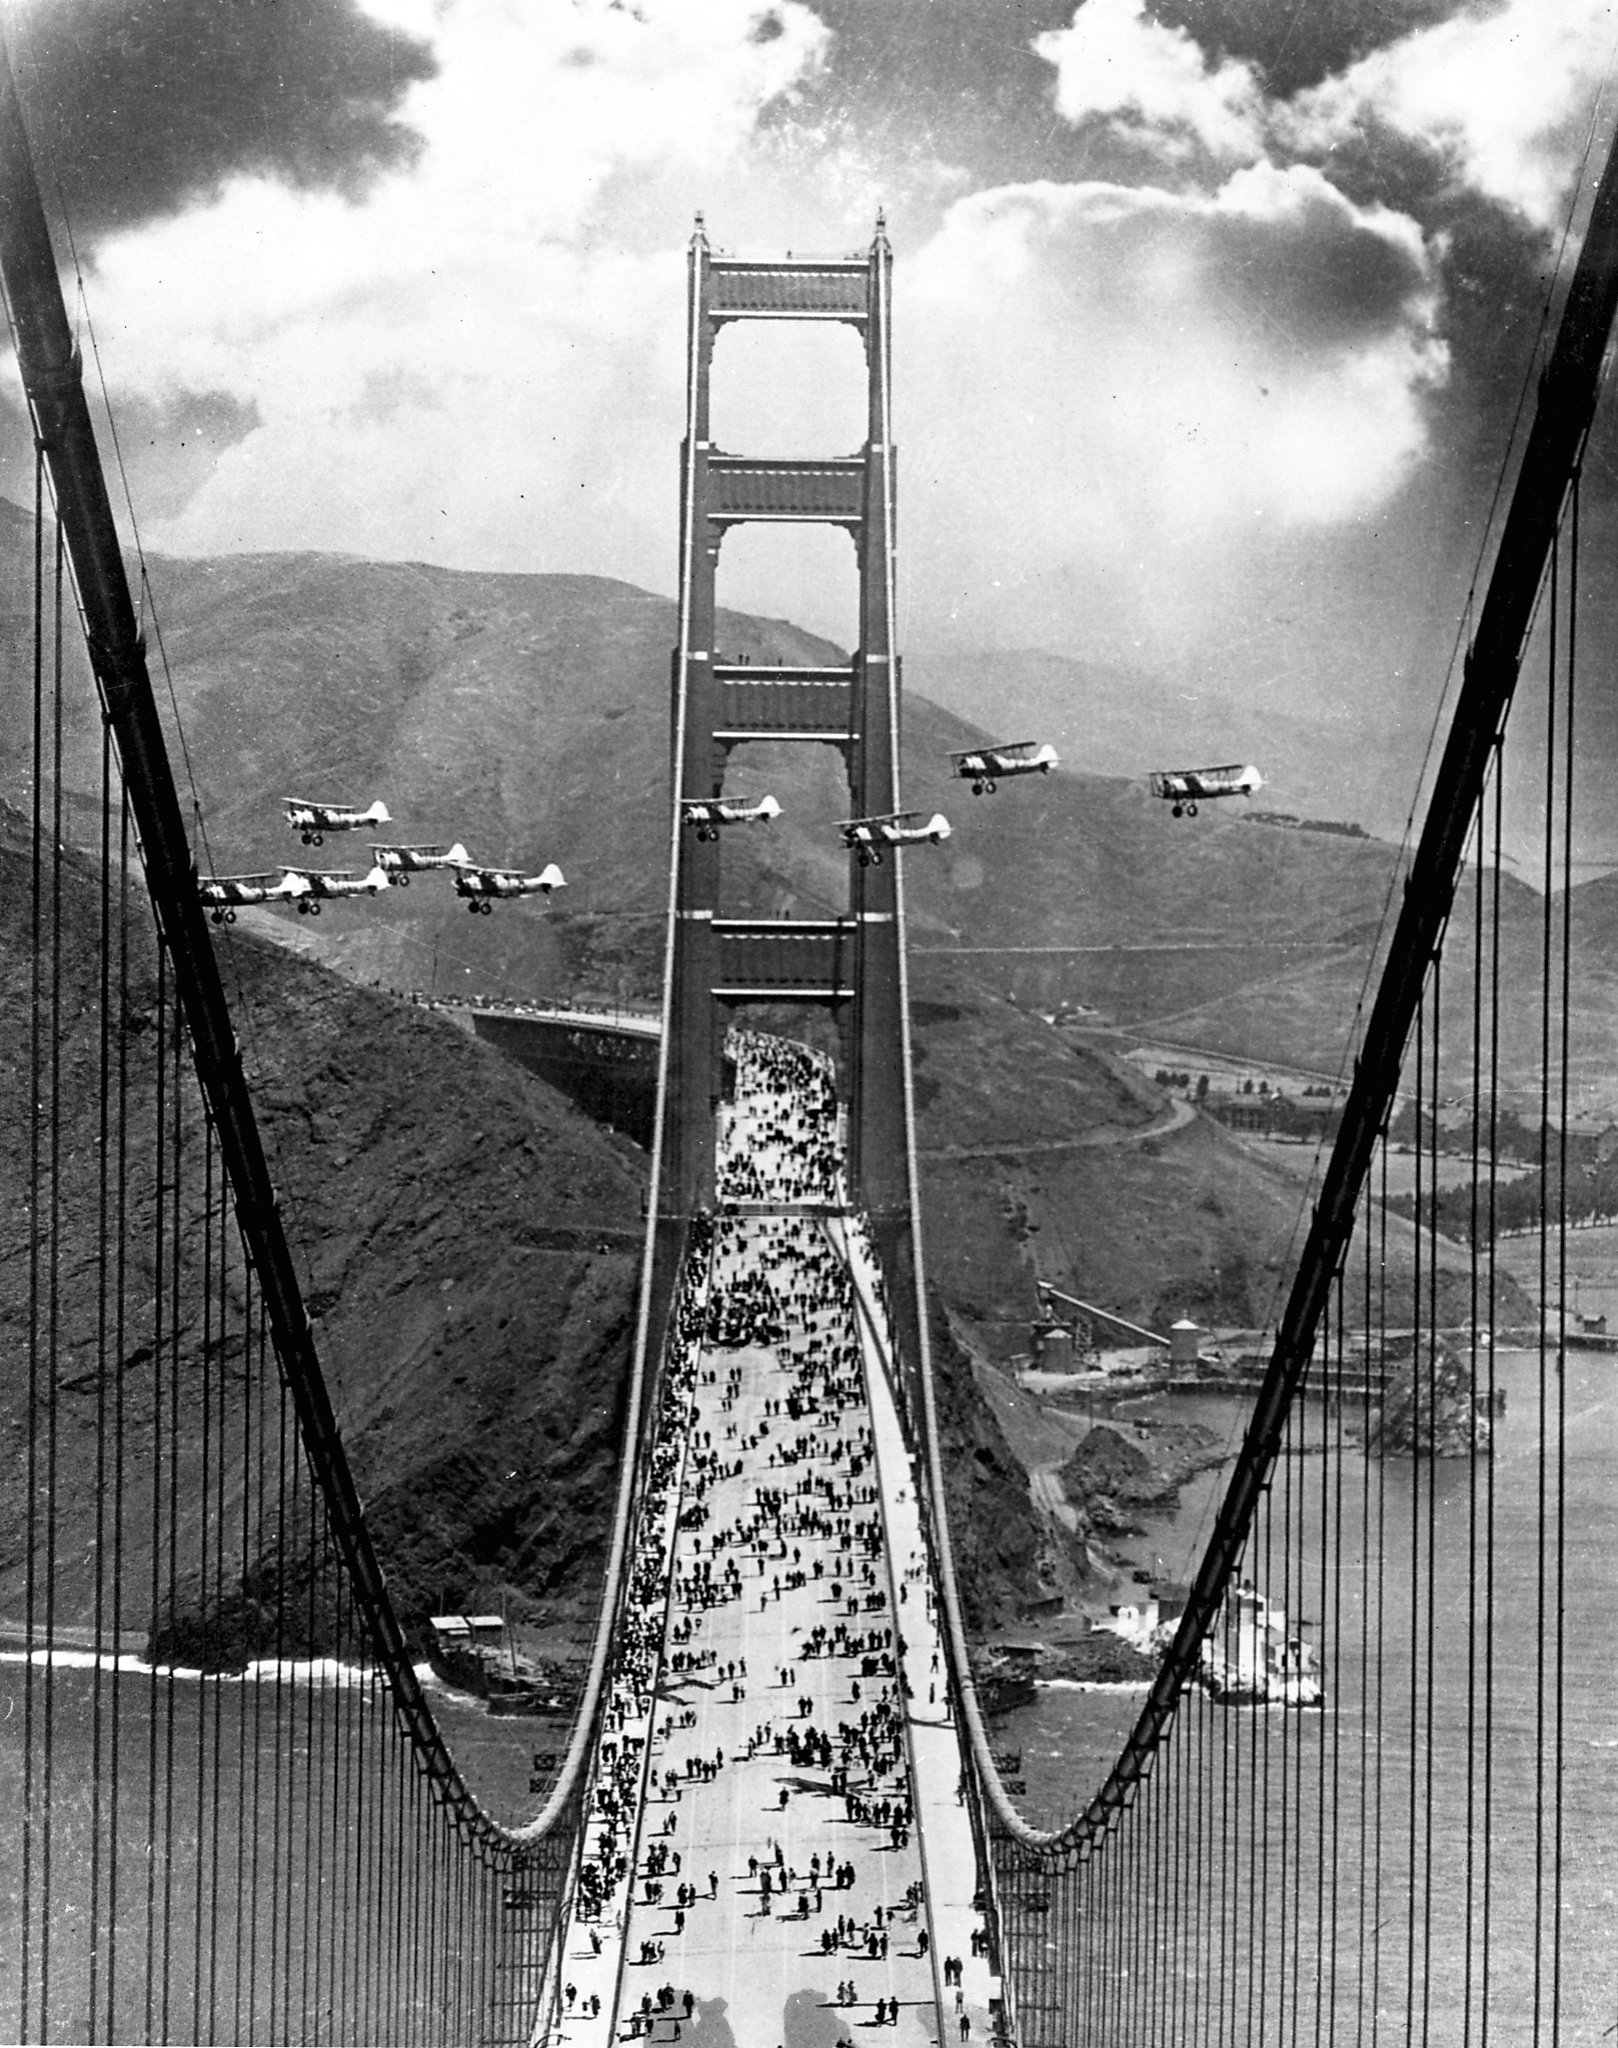 17 fun facts about the Golden Gate Bridge on its 79th birthday